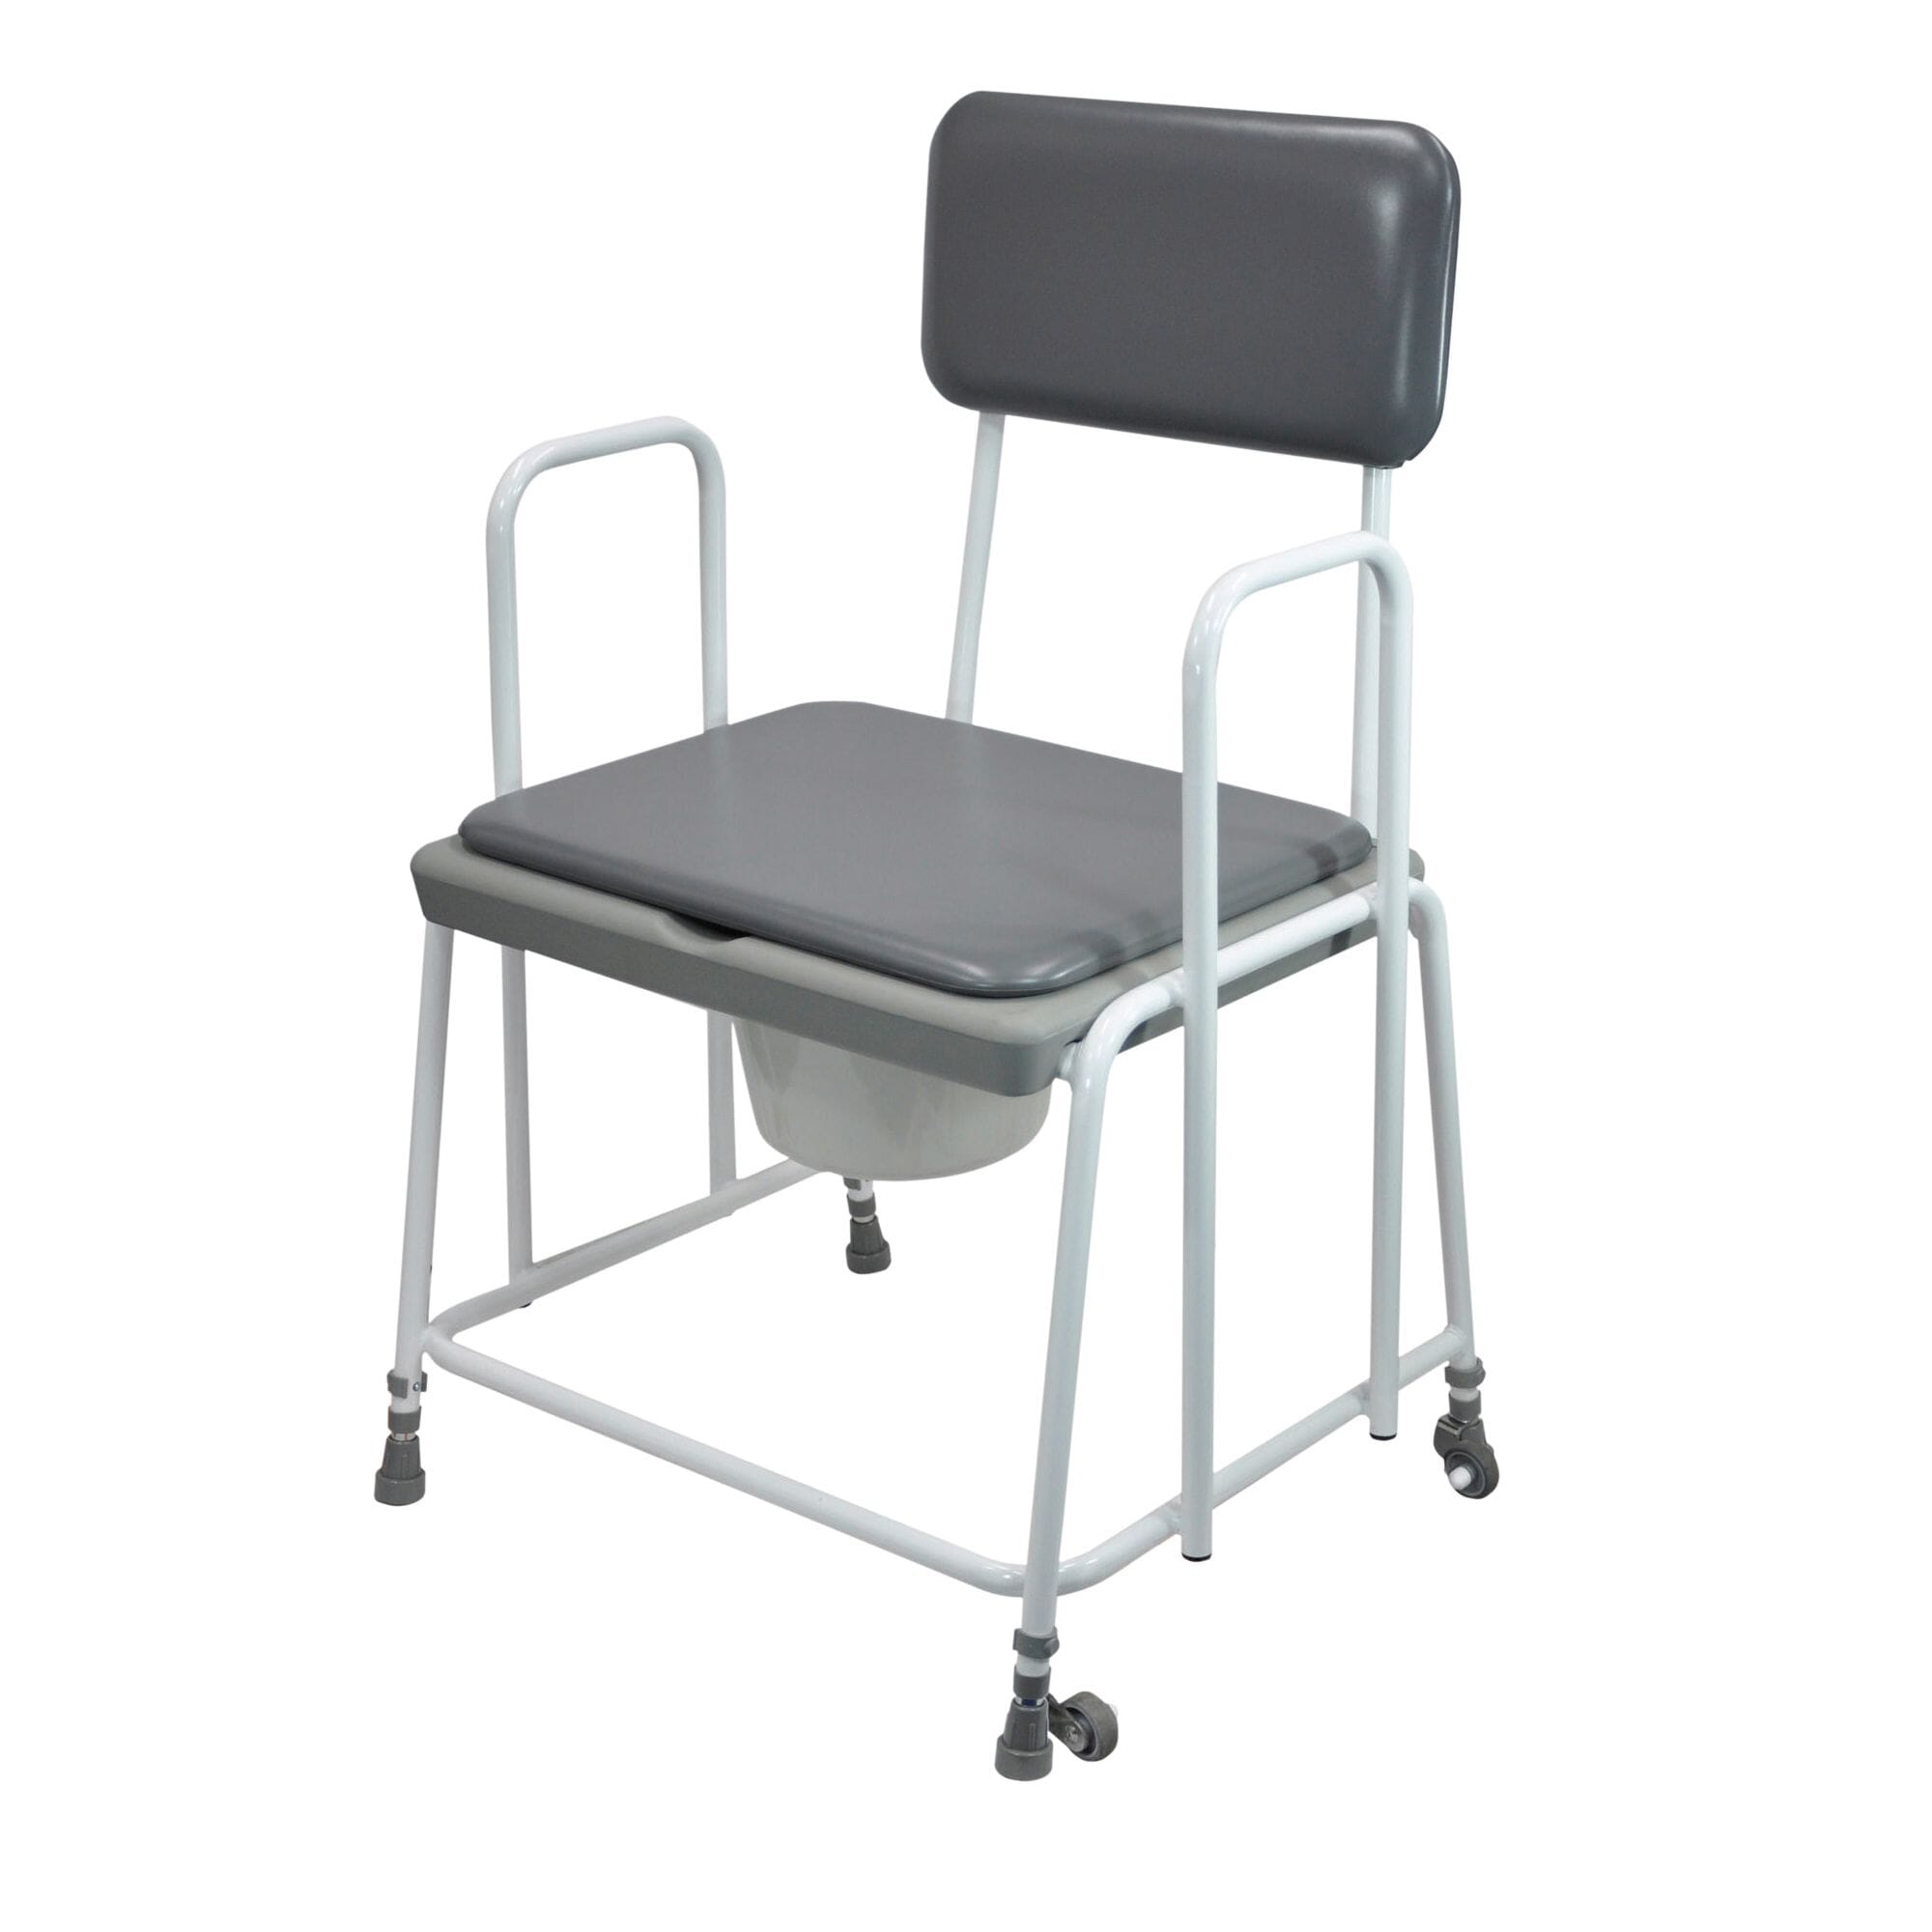 View Sussex Bariatric Commode information